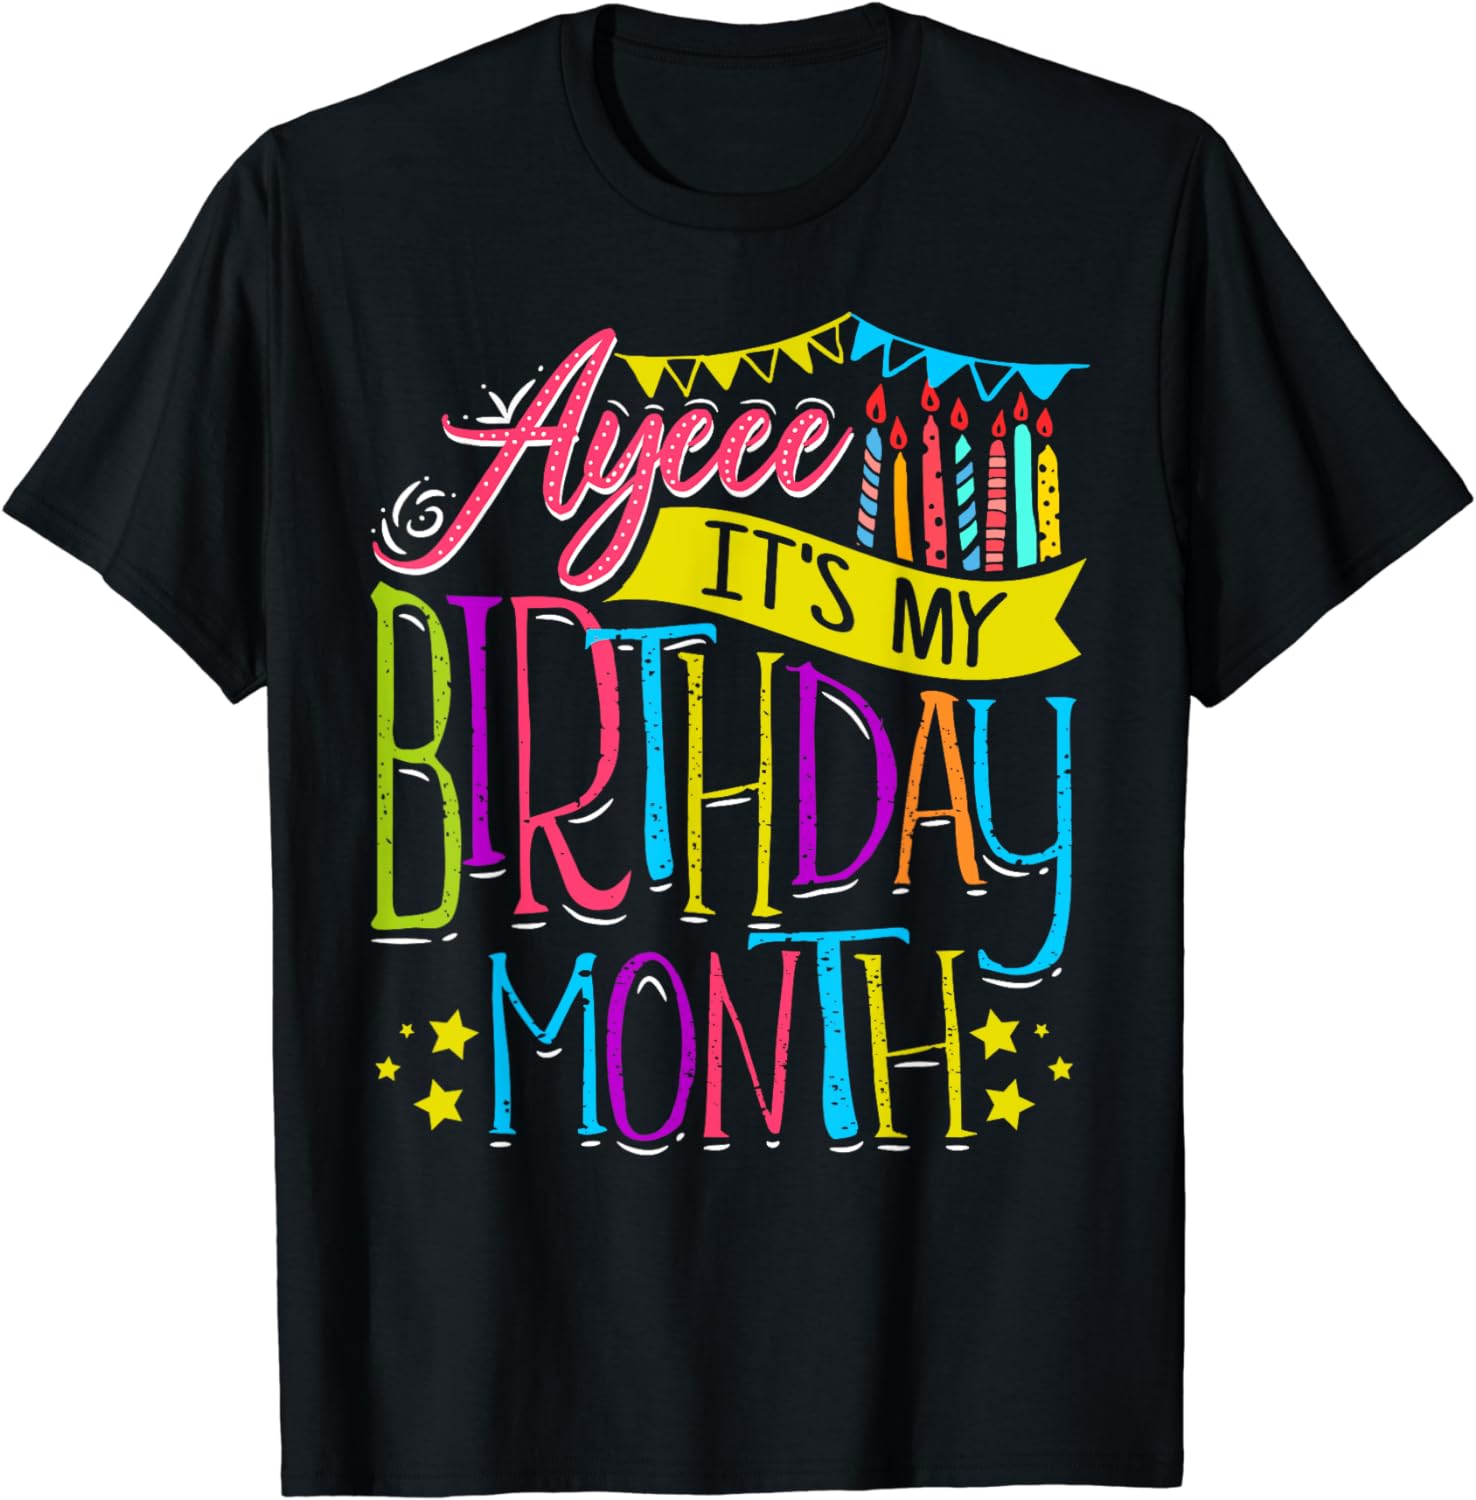 Ayeee It's My Birthday Month Cute Top for Her Celebration T-Shirt ...